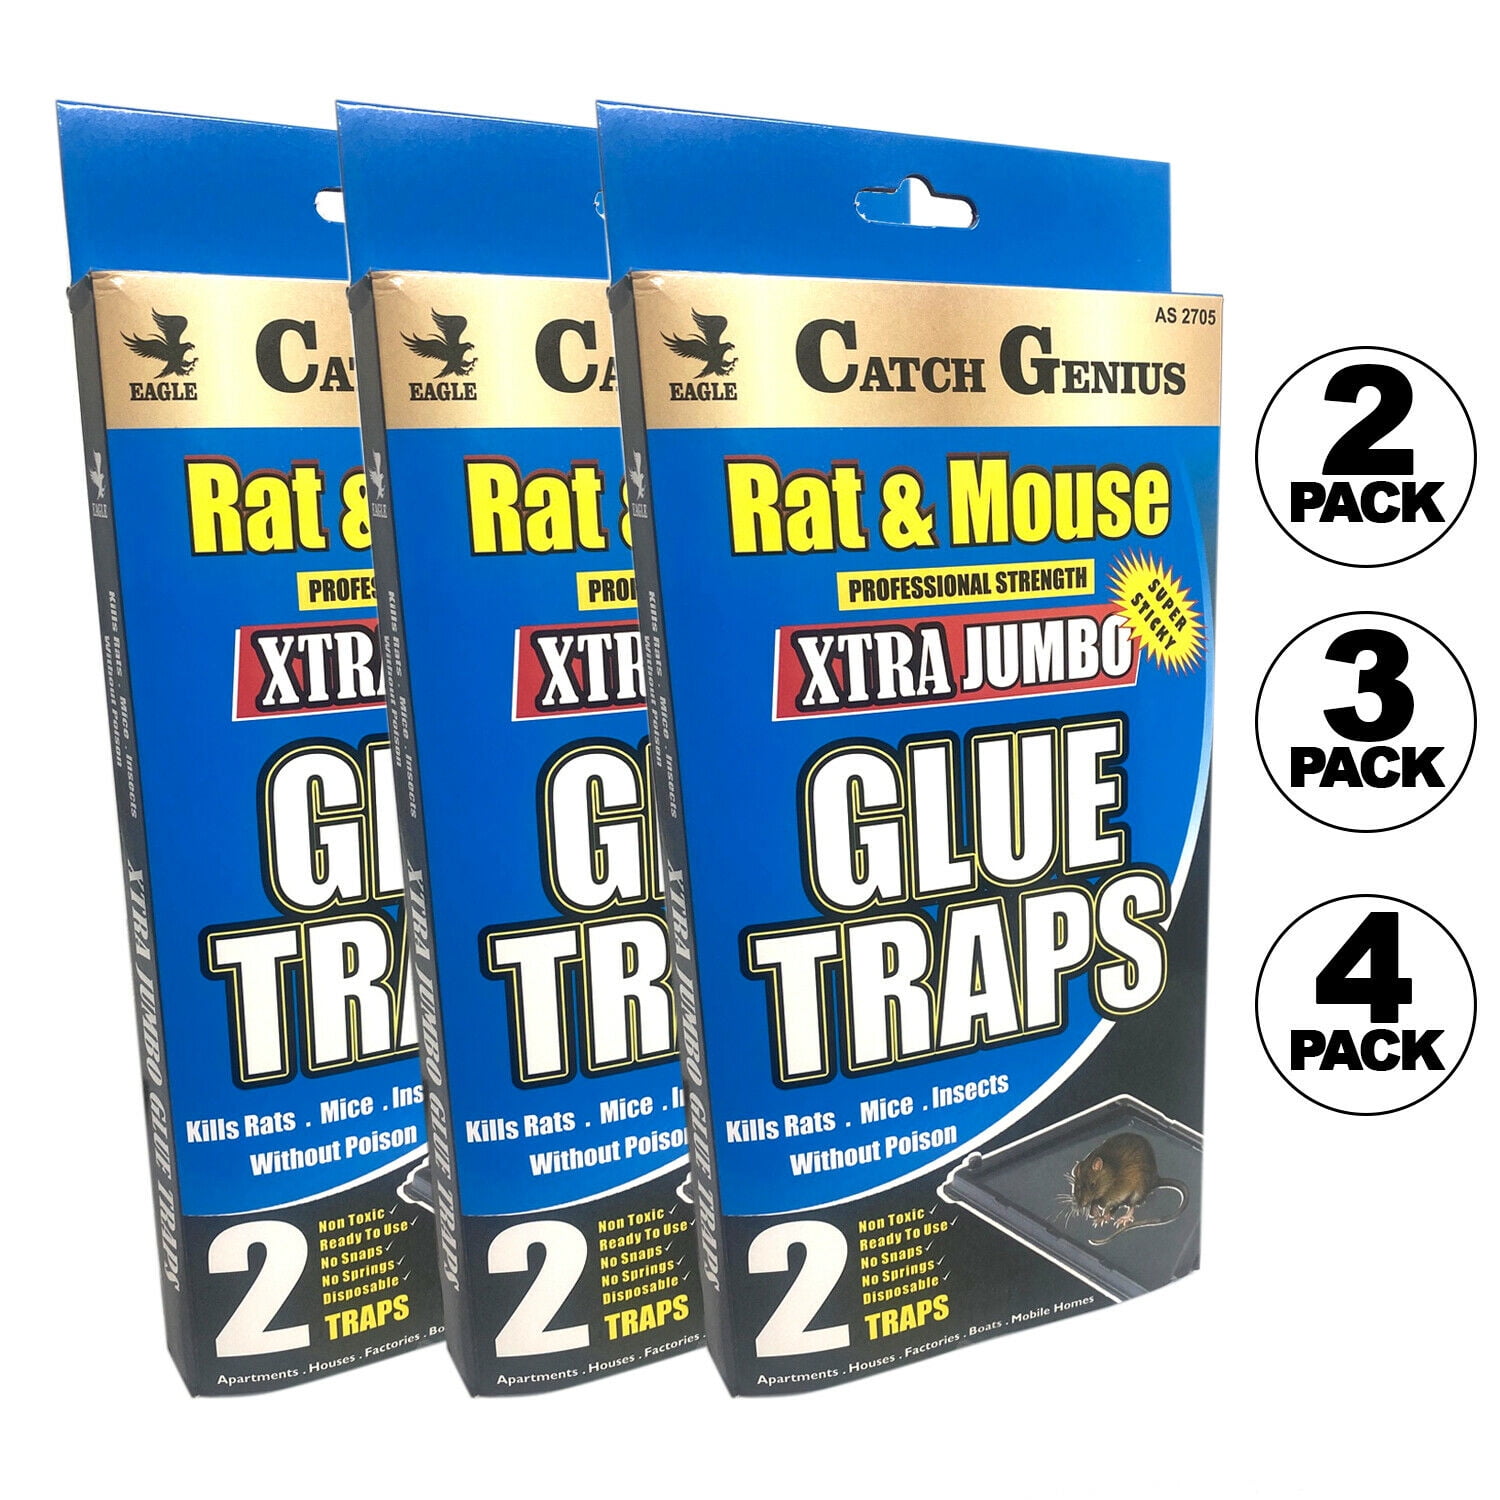 JUMBO MOUSE TRAP Sticky Glue RAT MICE Boards Baited 2TRAP/PCK FAST SHIPPING 